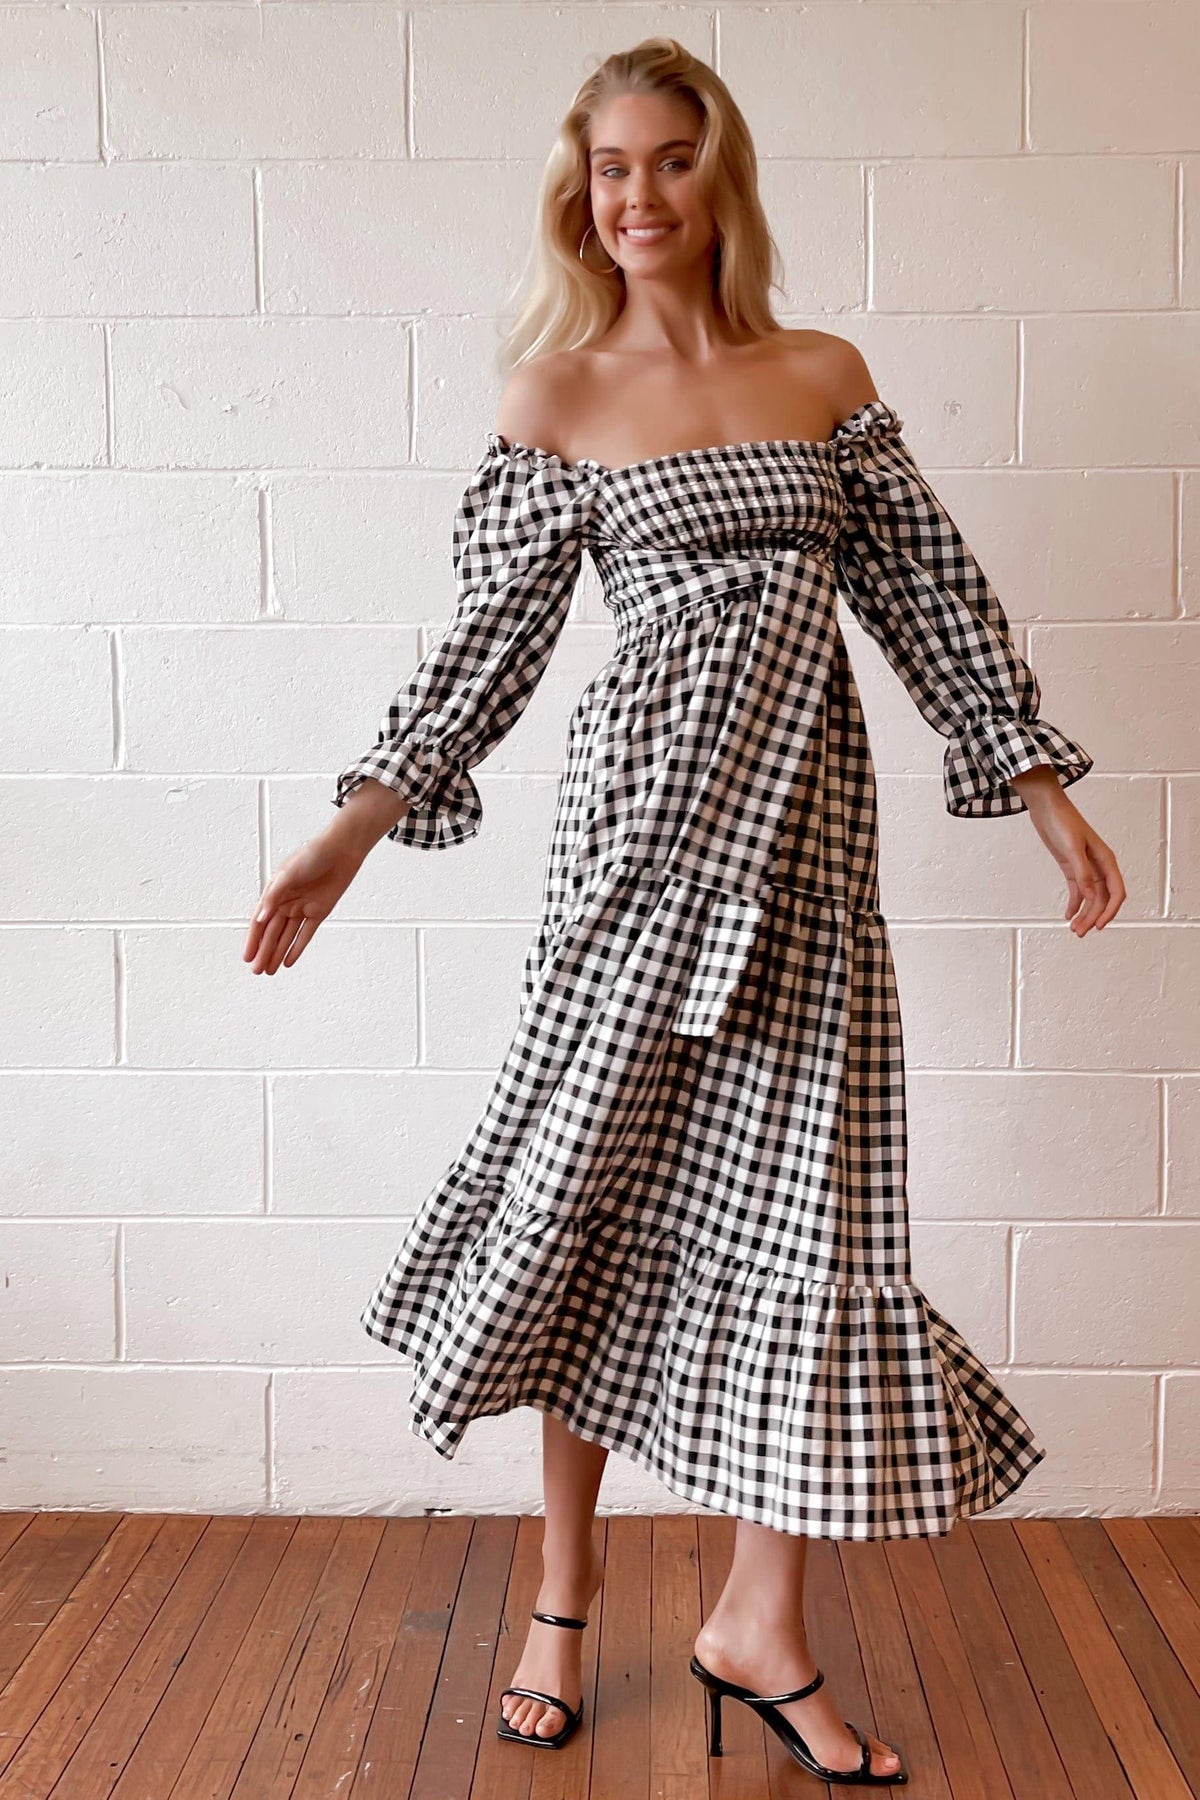 Cimberly Dress, BLACK, CHECKED, DRESS, DRESSES, ELASTANE, LONG SLEEVE, OFF SHOULDER, POLYESTER, PRINT, RUFFLE, SPO-DISABLED, VINTAGE, WAIST TIE, WHITE, Cimberly Dress only $71.00 @ MISHKAH ONLINE FASHION BOUTIQUE, Shop The Latest Women&#39;s Dresses - Our New Cimberly Dress is only $71.00, @ MISHKAH ONLINE FASHION BOUTIQUE-MISHKAH